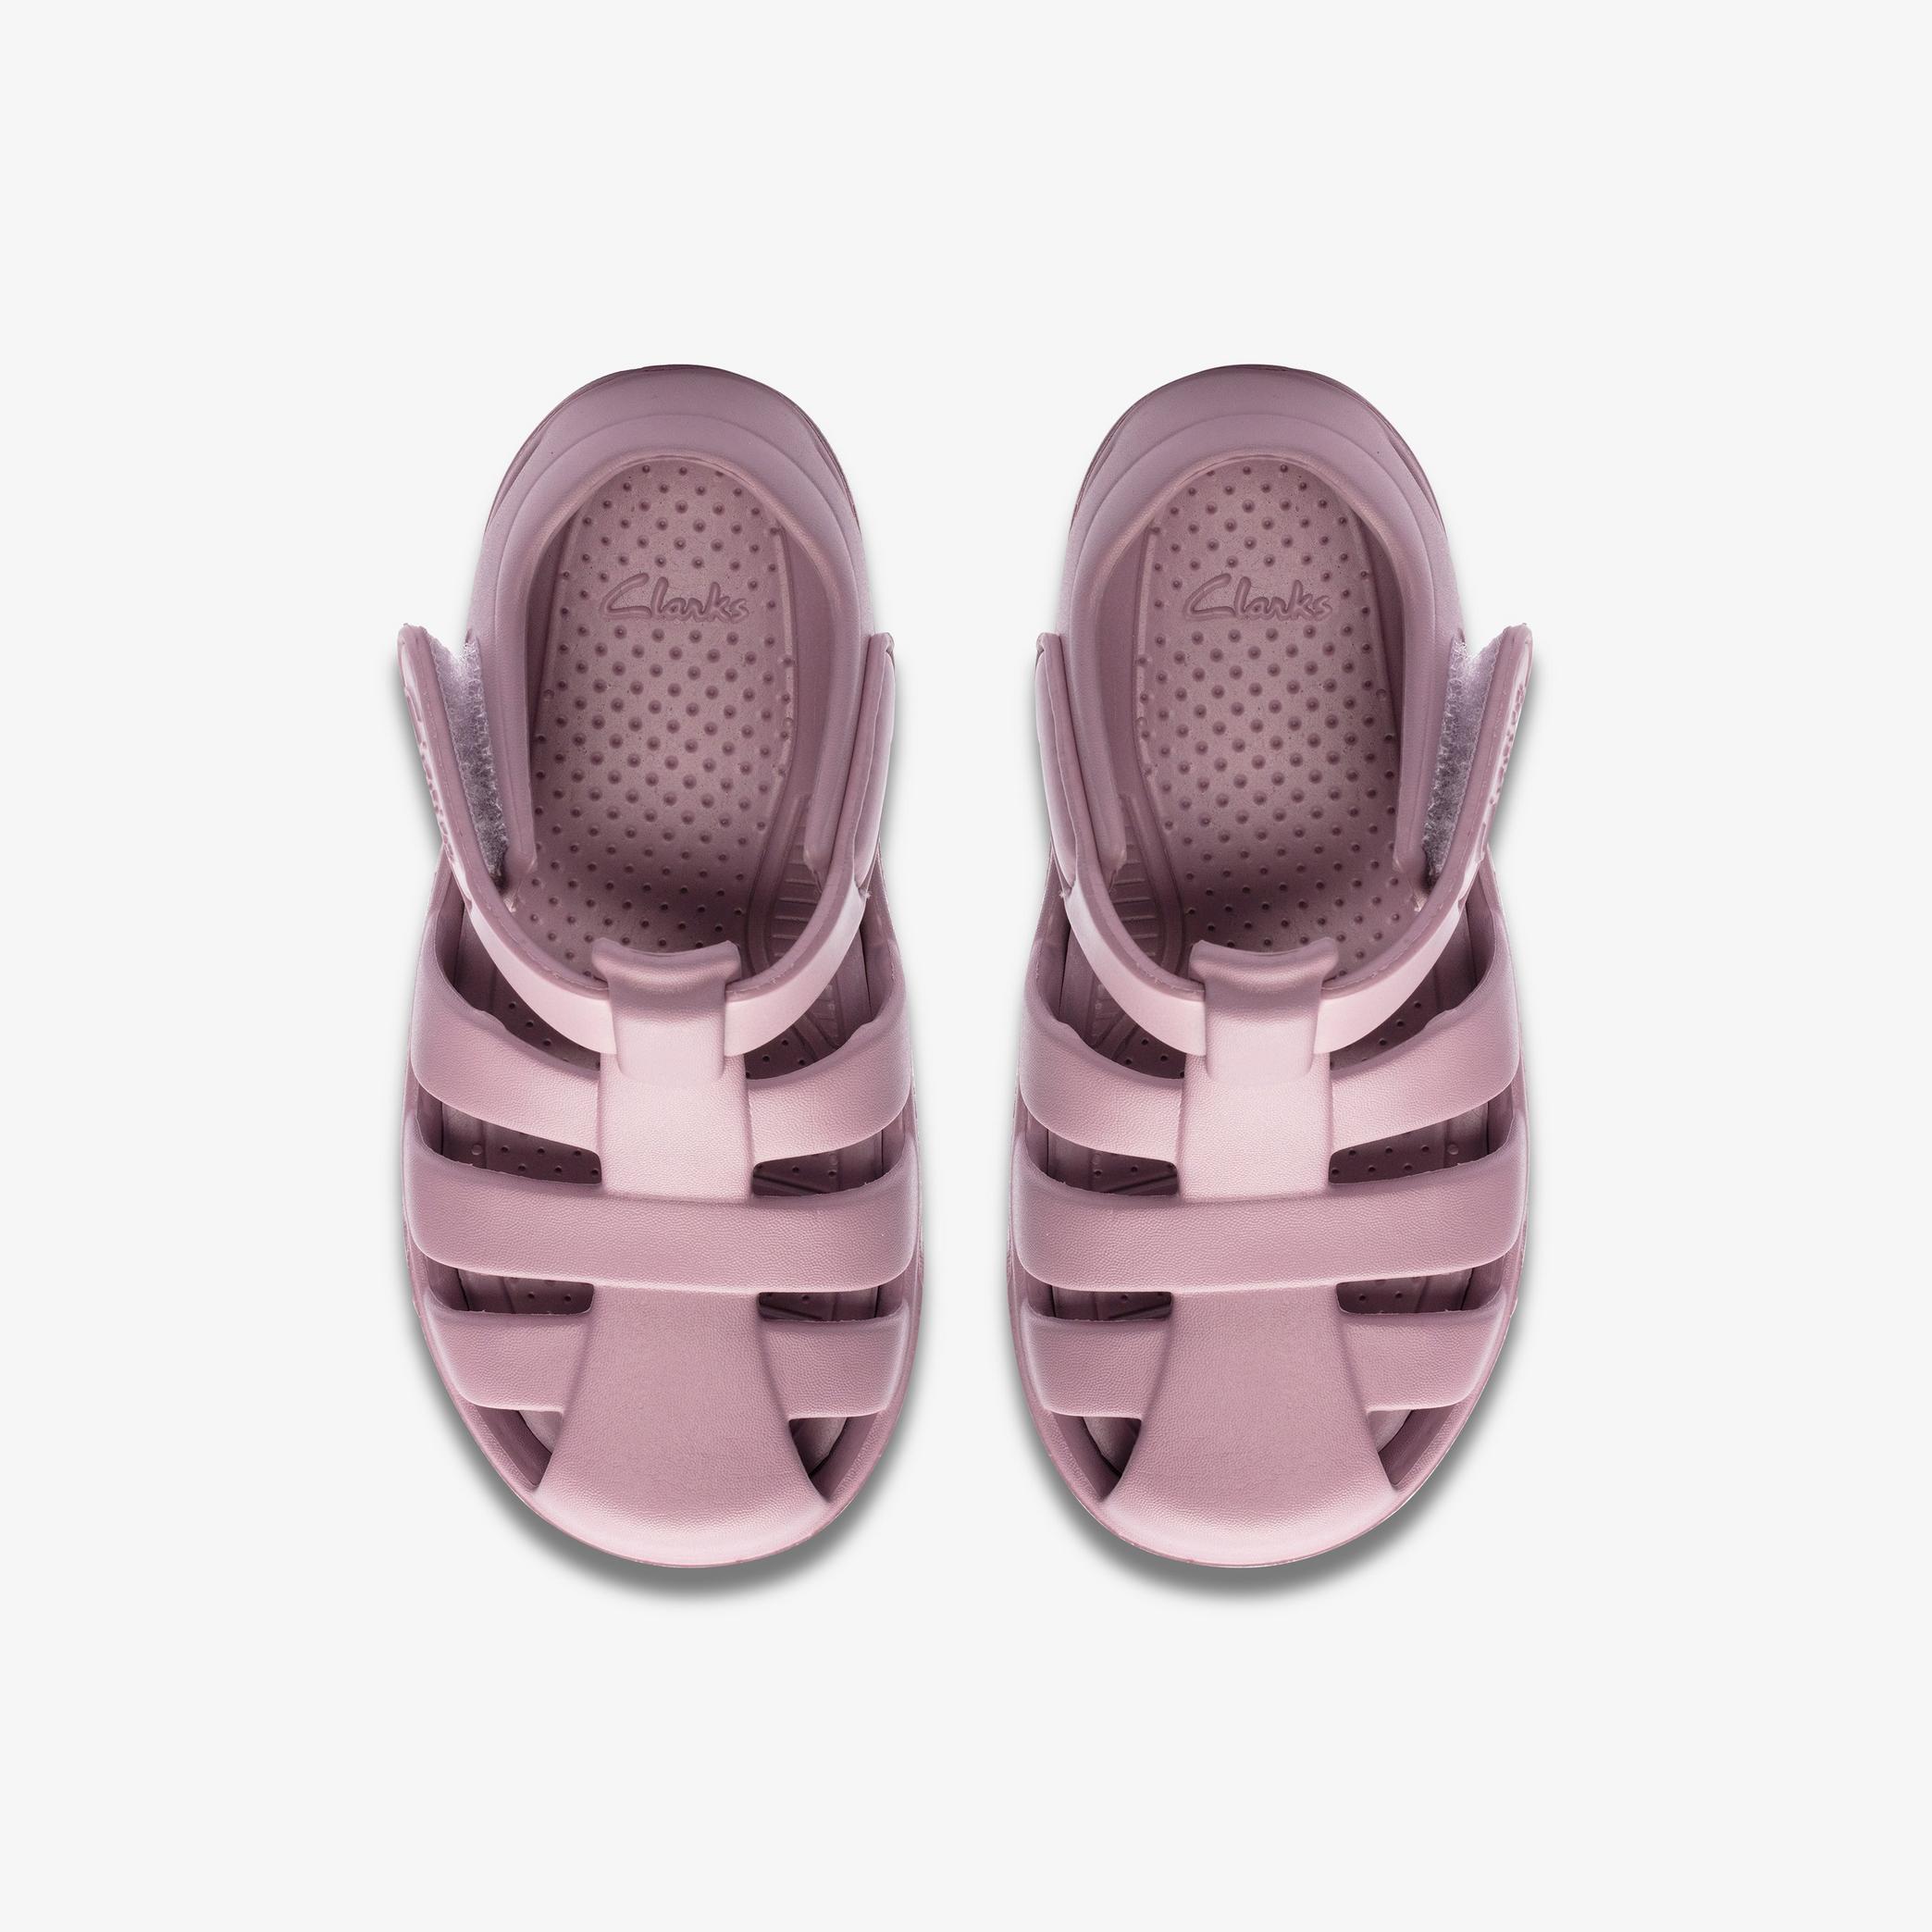 Move Kind Toddler Dusty Pink Flat Sandals, view 6 of 6